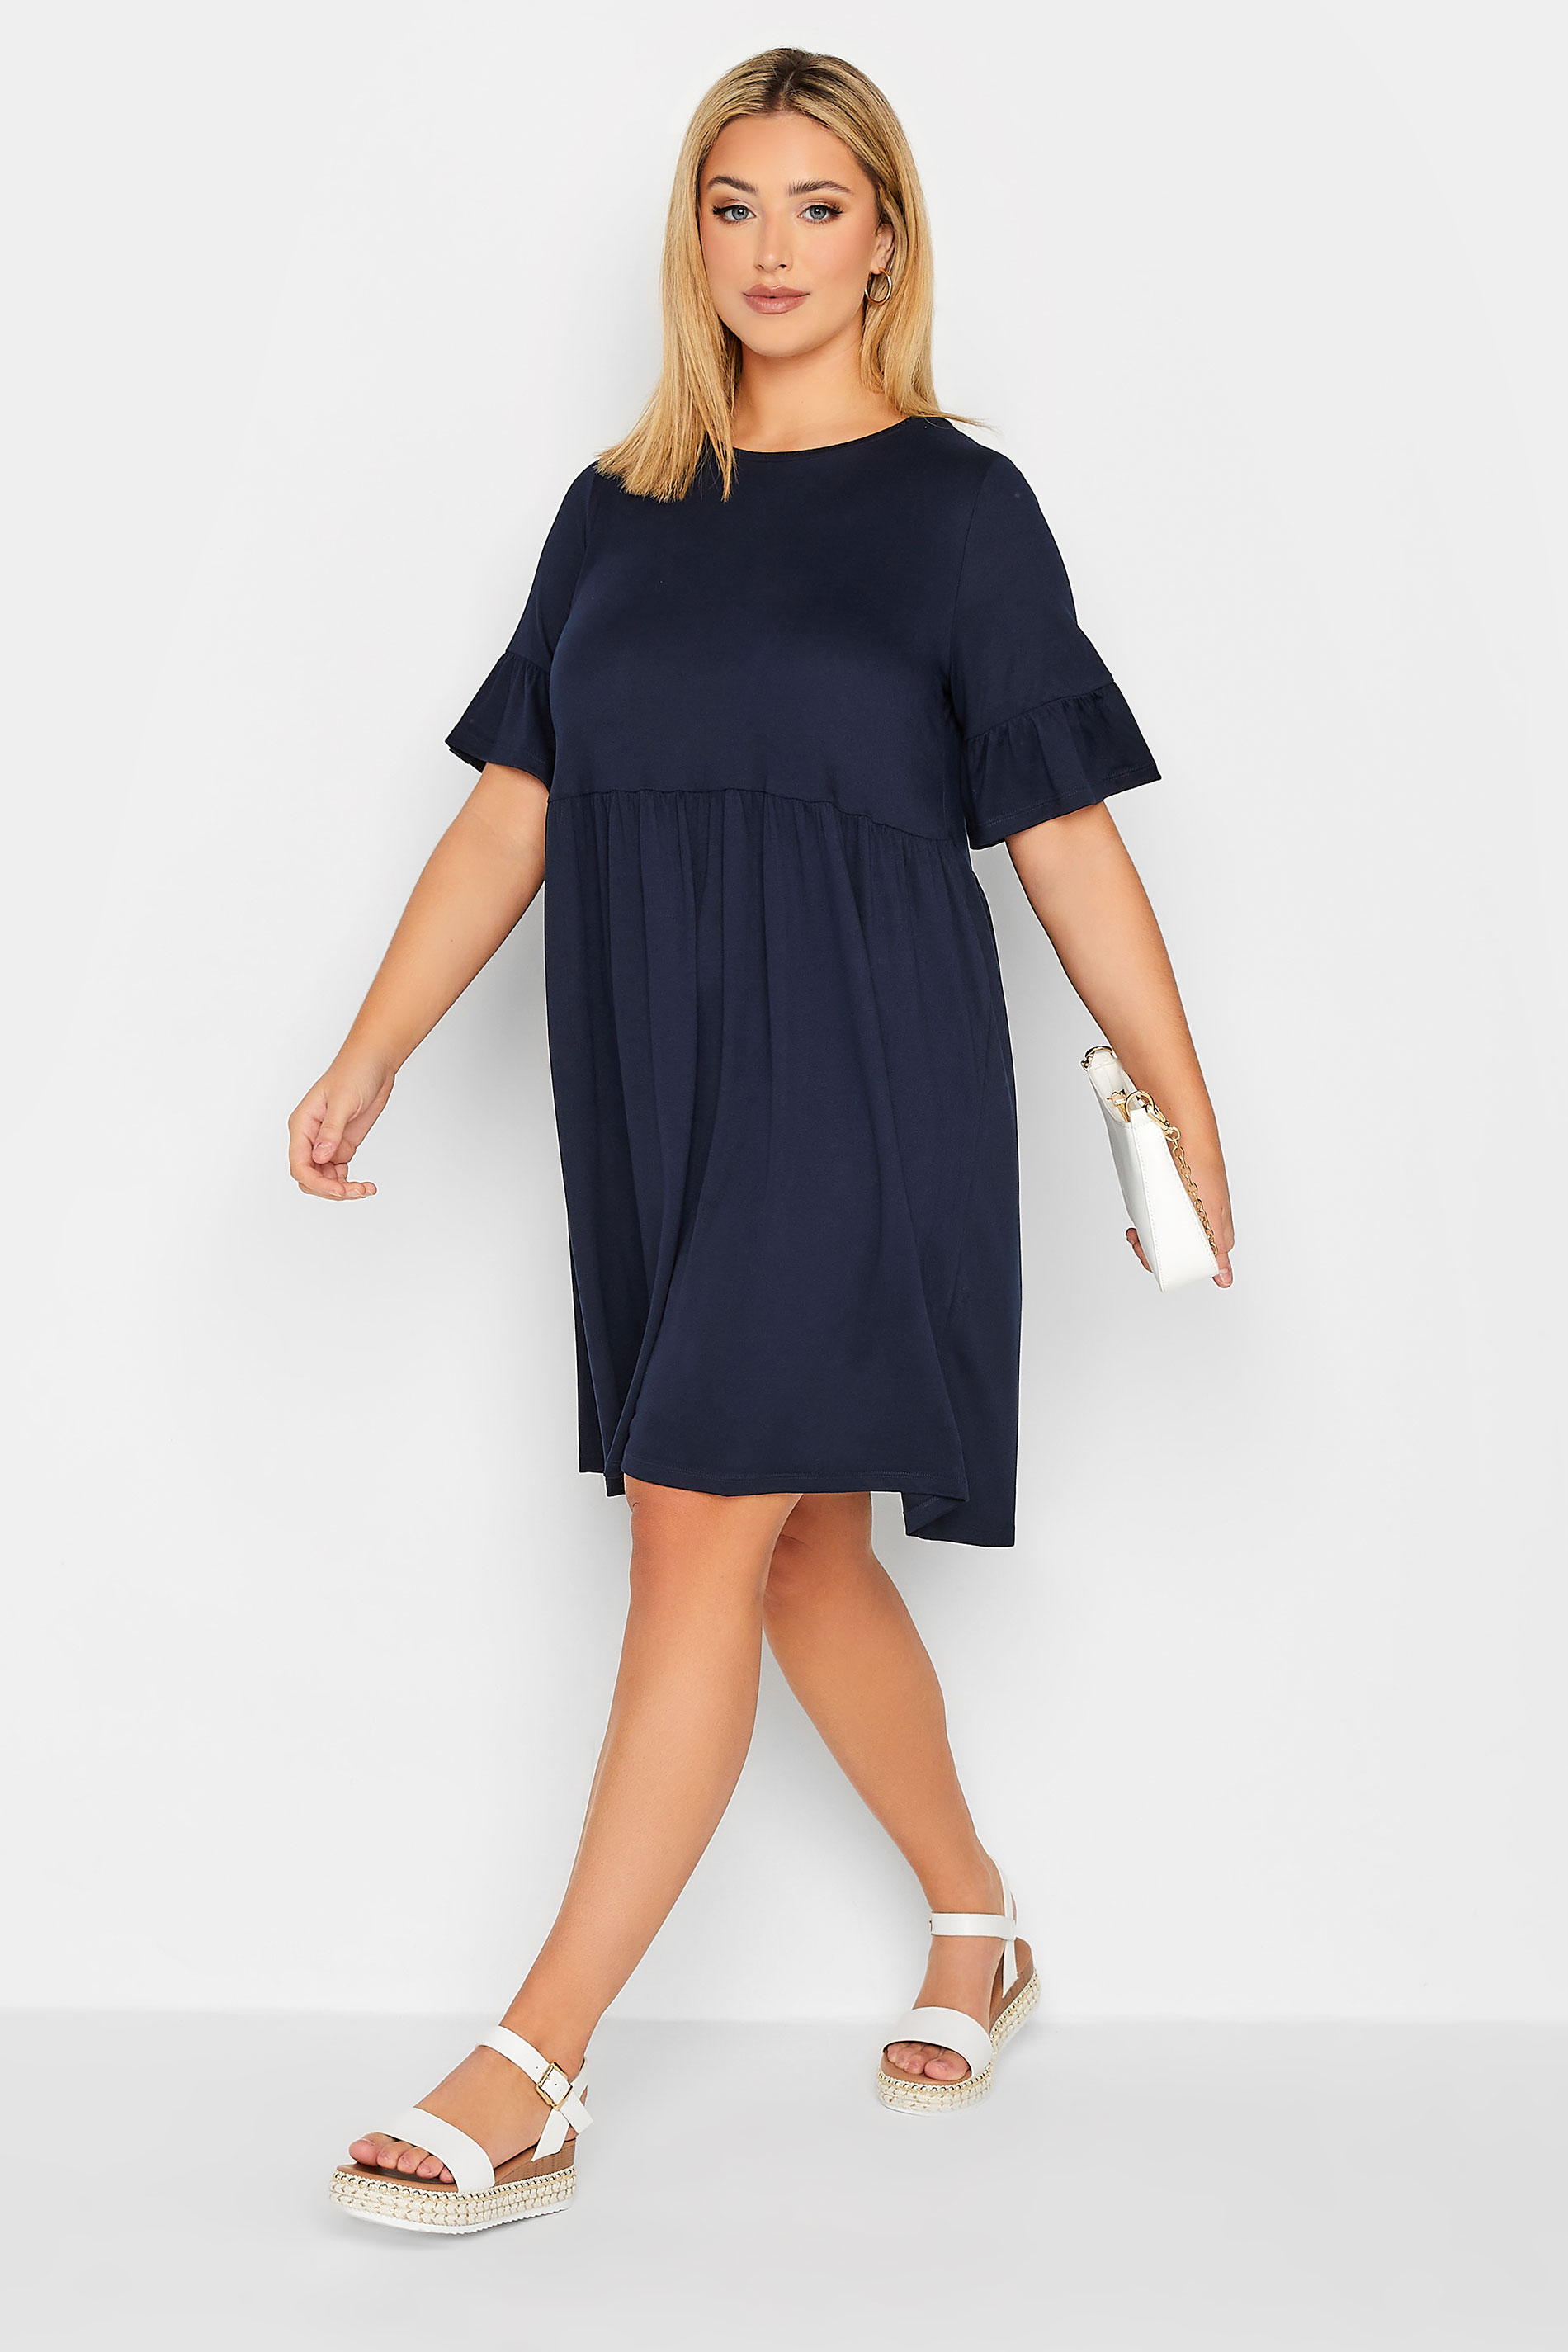 YOURS Plus Size Navy Blue Frill Sleeve Smock Dress | Yours Clothing 1